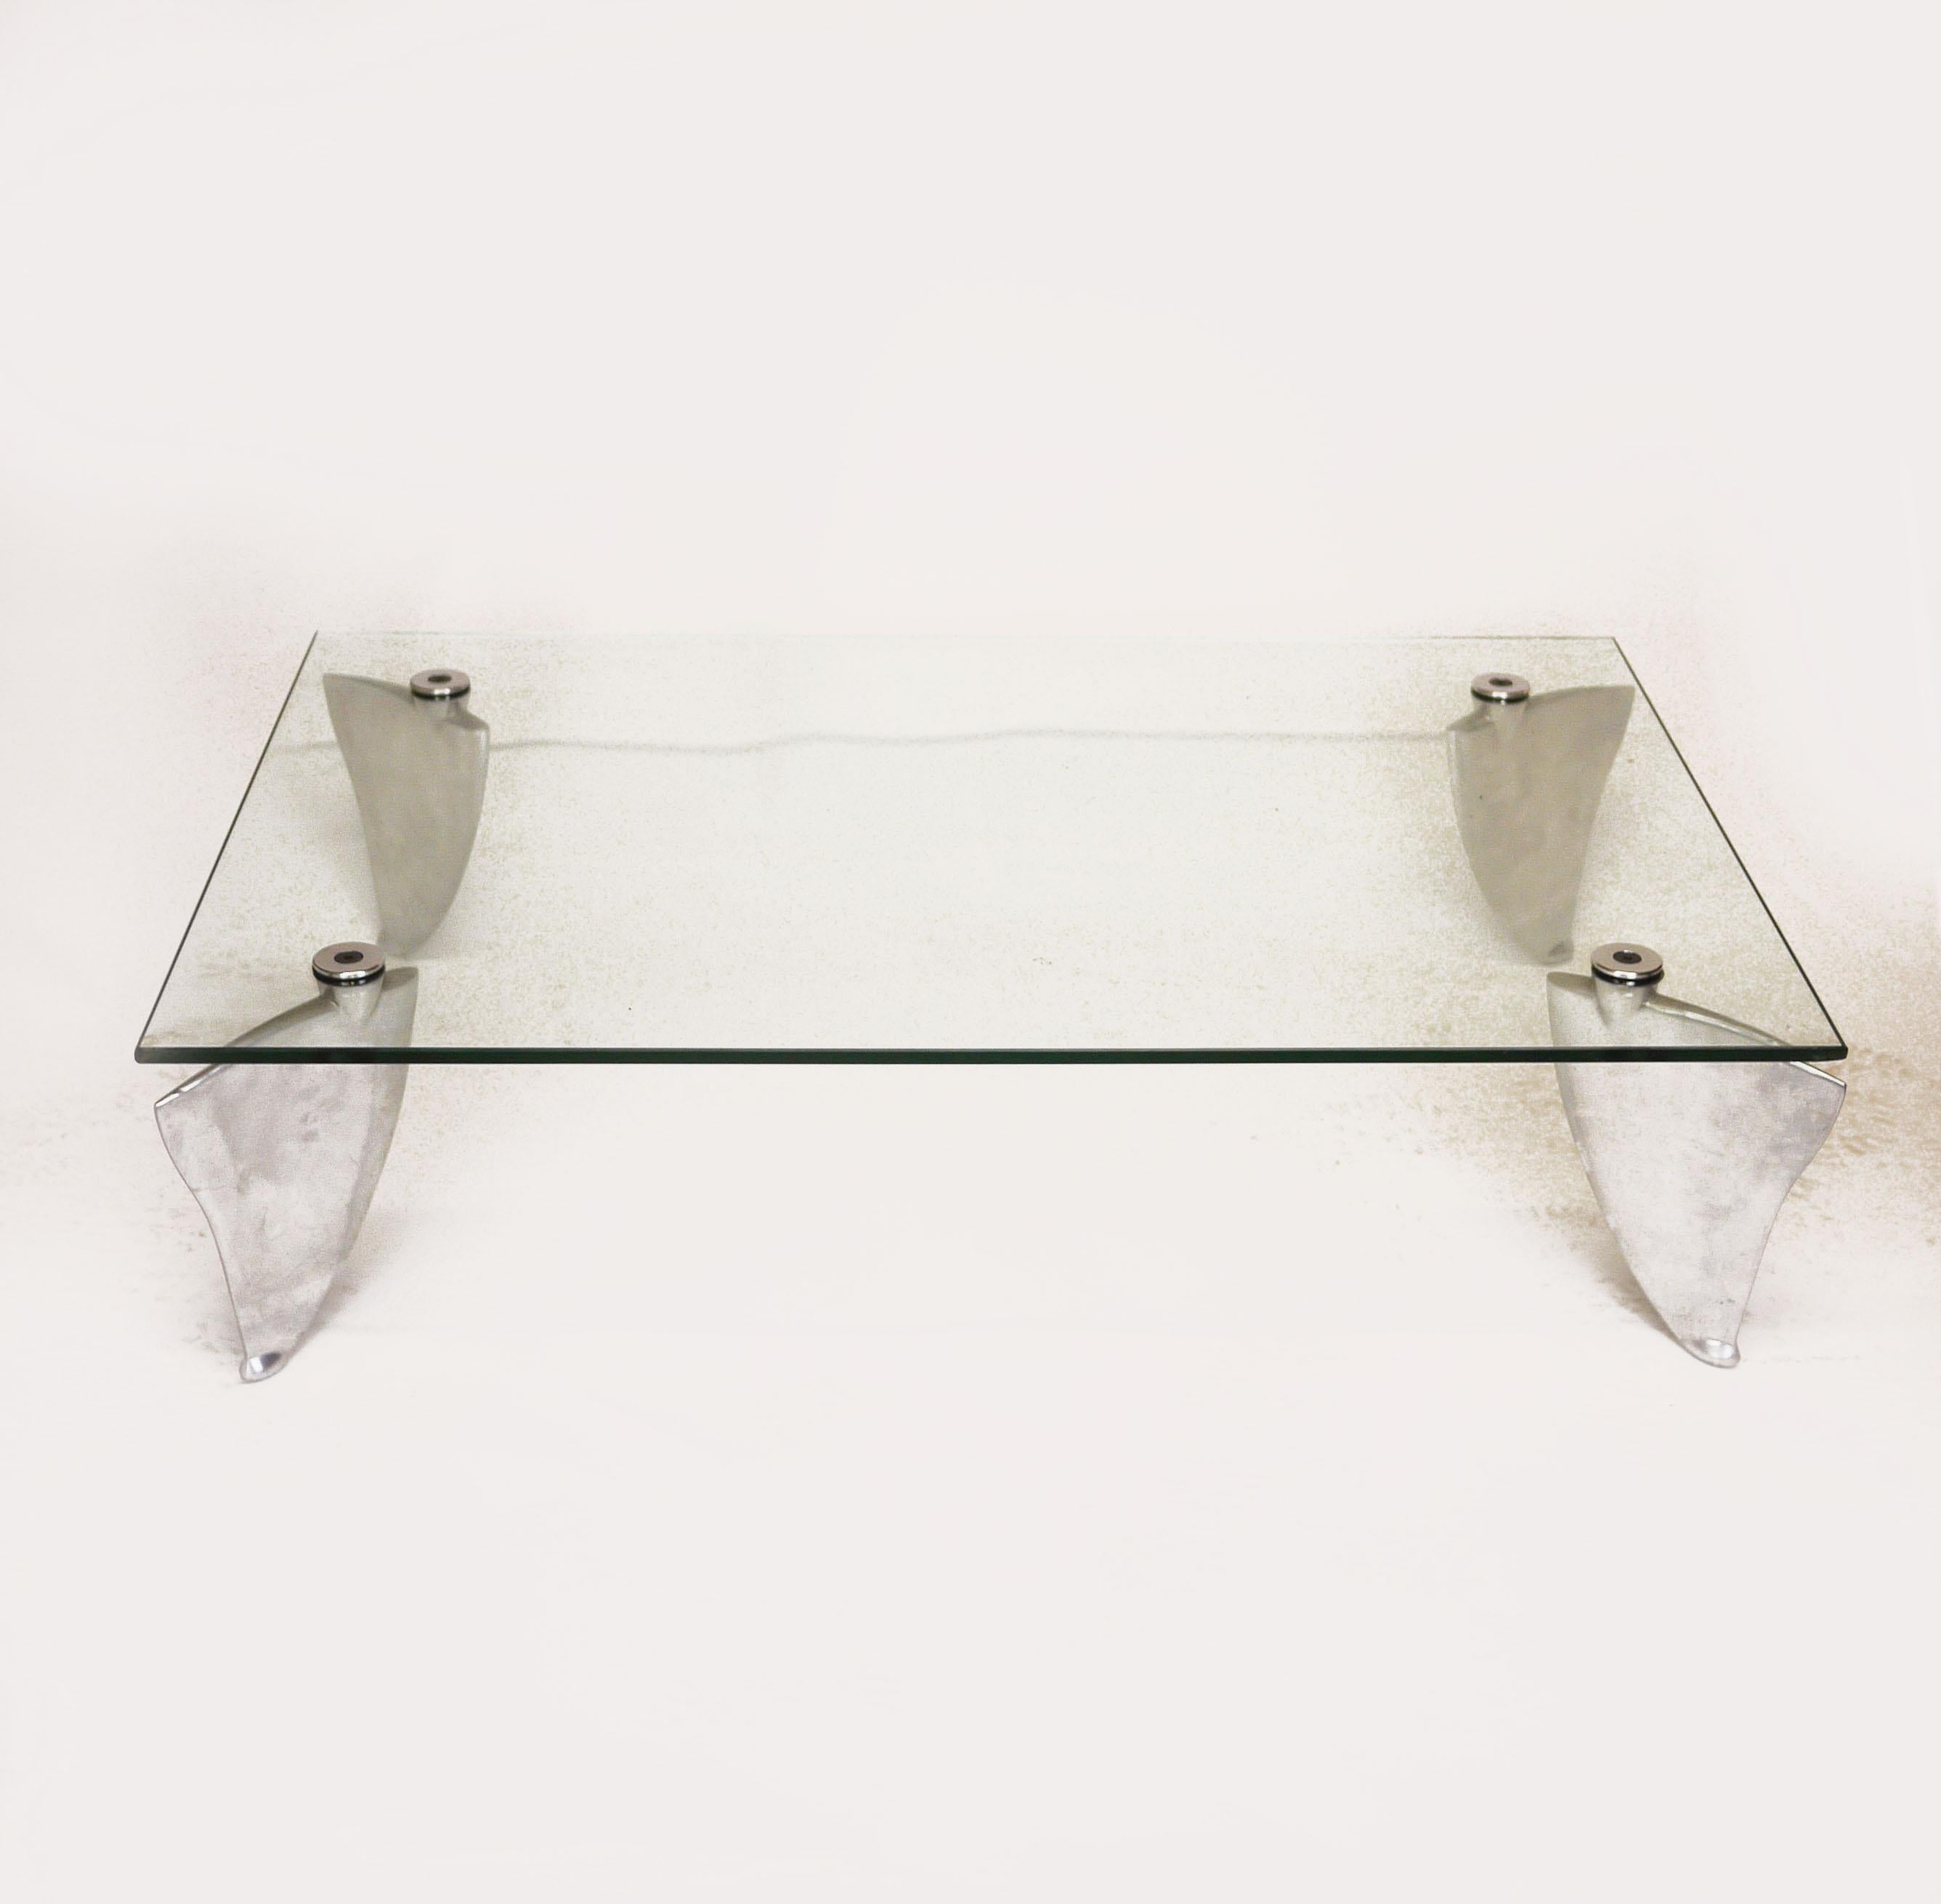 Vintage Glass and Aluminum 'Fipper' Coffee Table by Matthew Hilton for SCP, 1980 For Sale 2